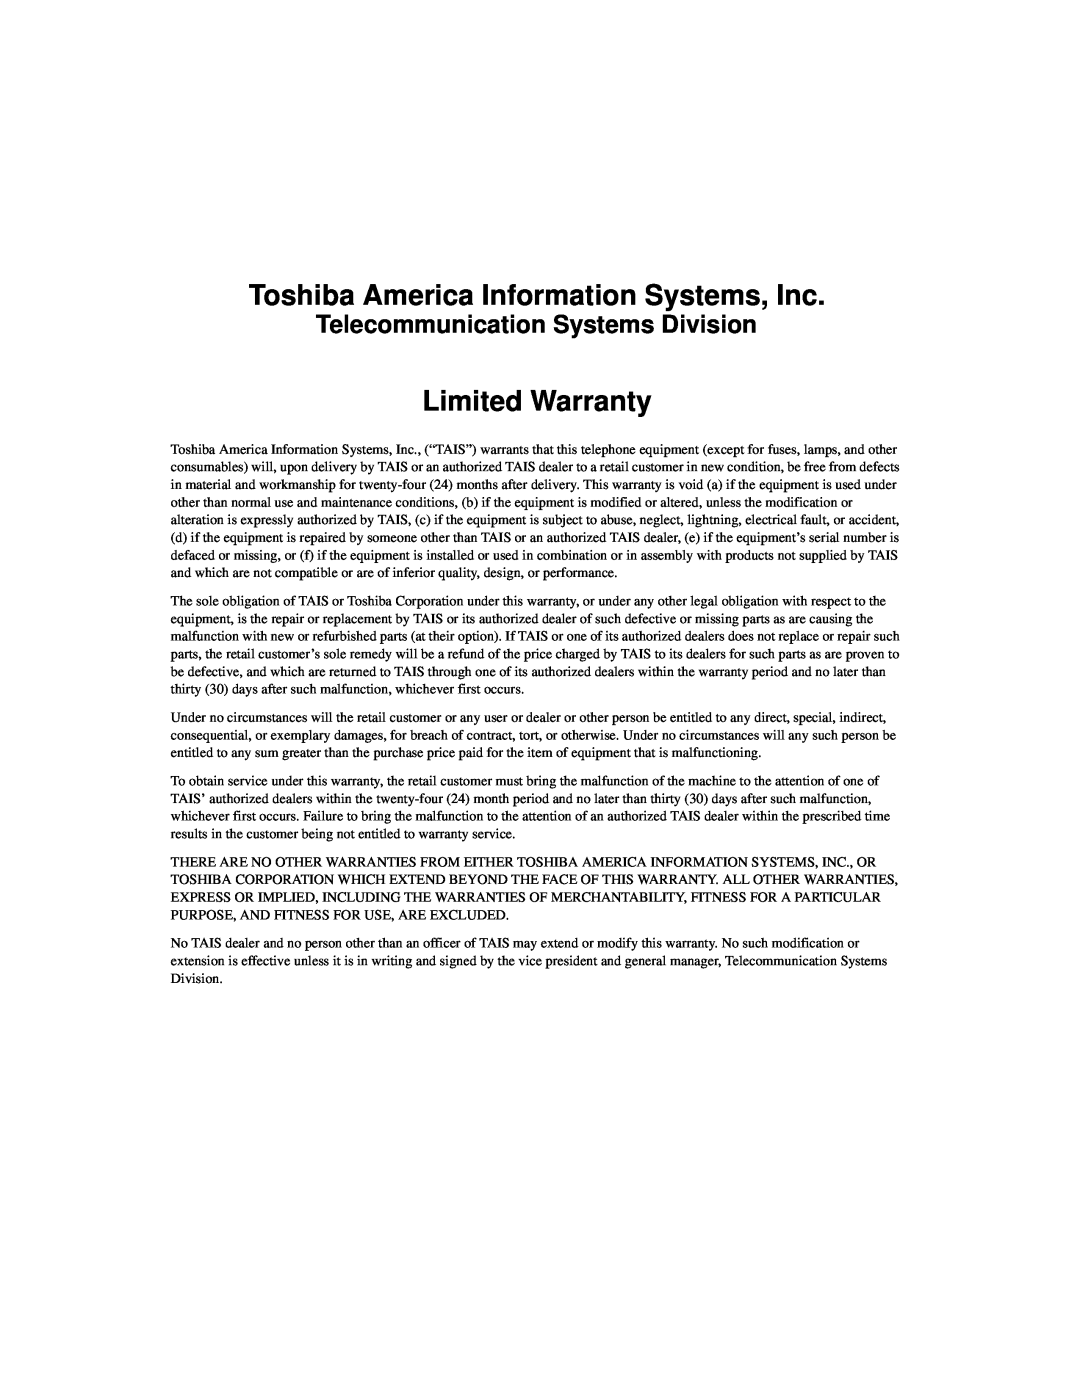 Toshiba IPT, DKT manual Telecommunication Systems Division, Toshiba America Information Systems, Inc, Limited Warranty 